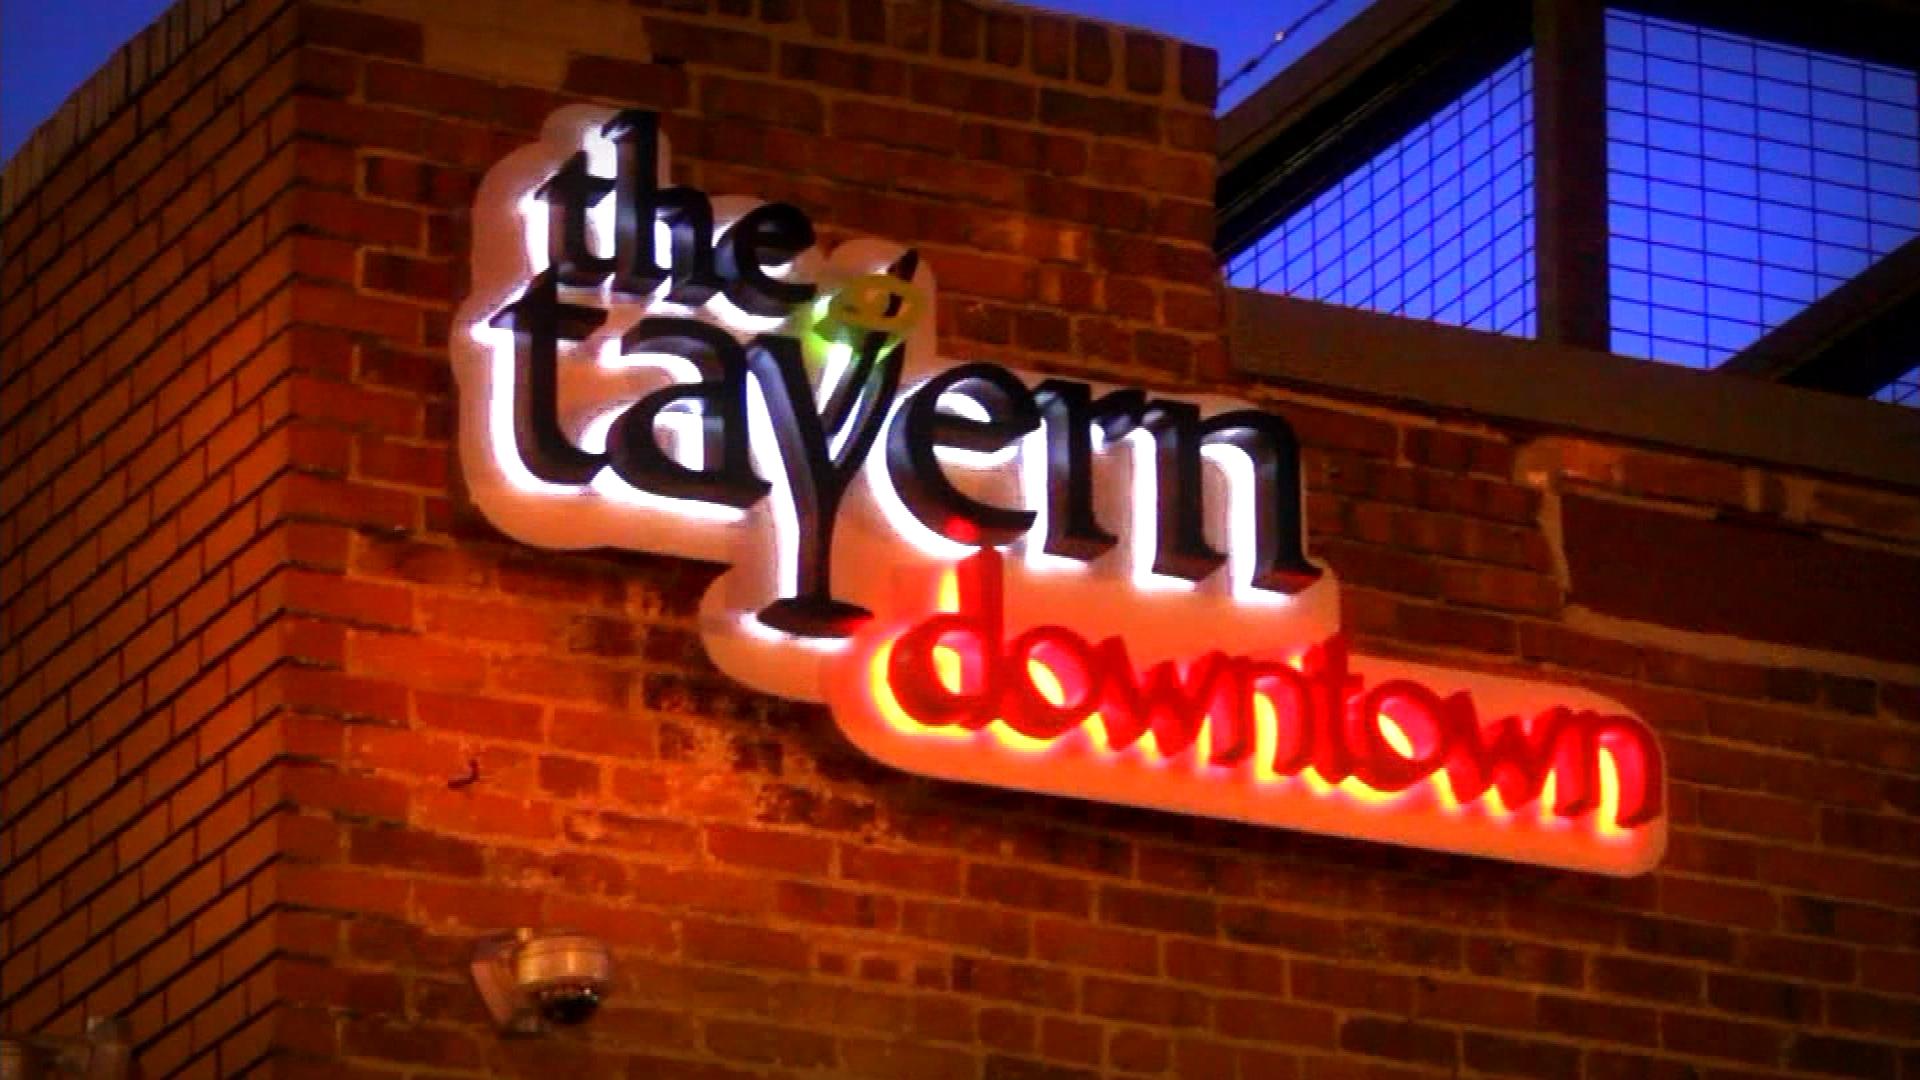 The Tavern Downtown (credit: CBS)